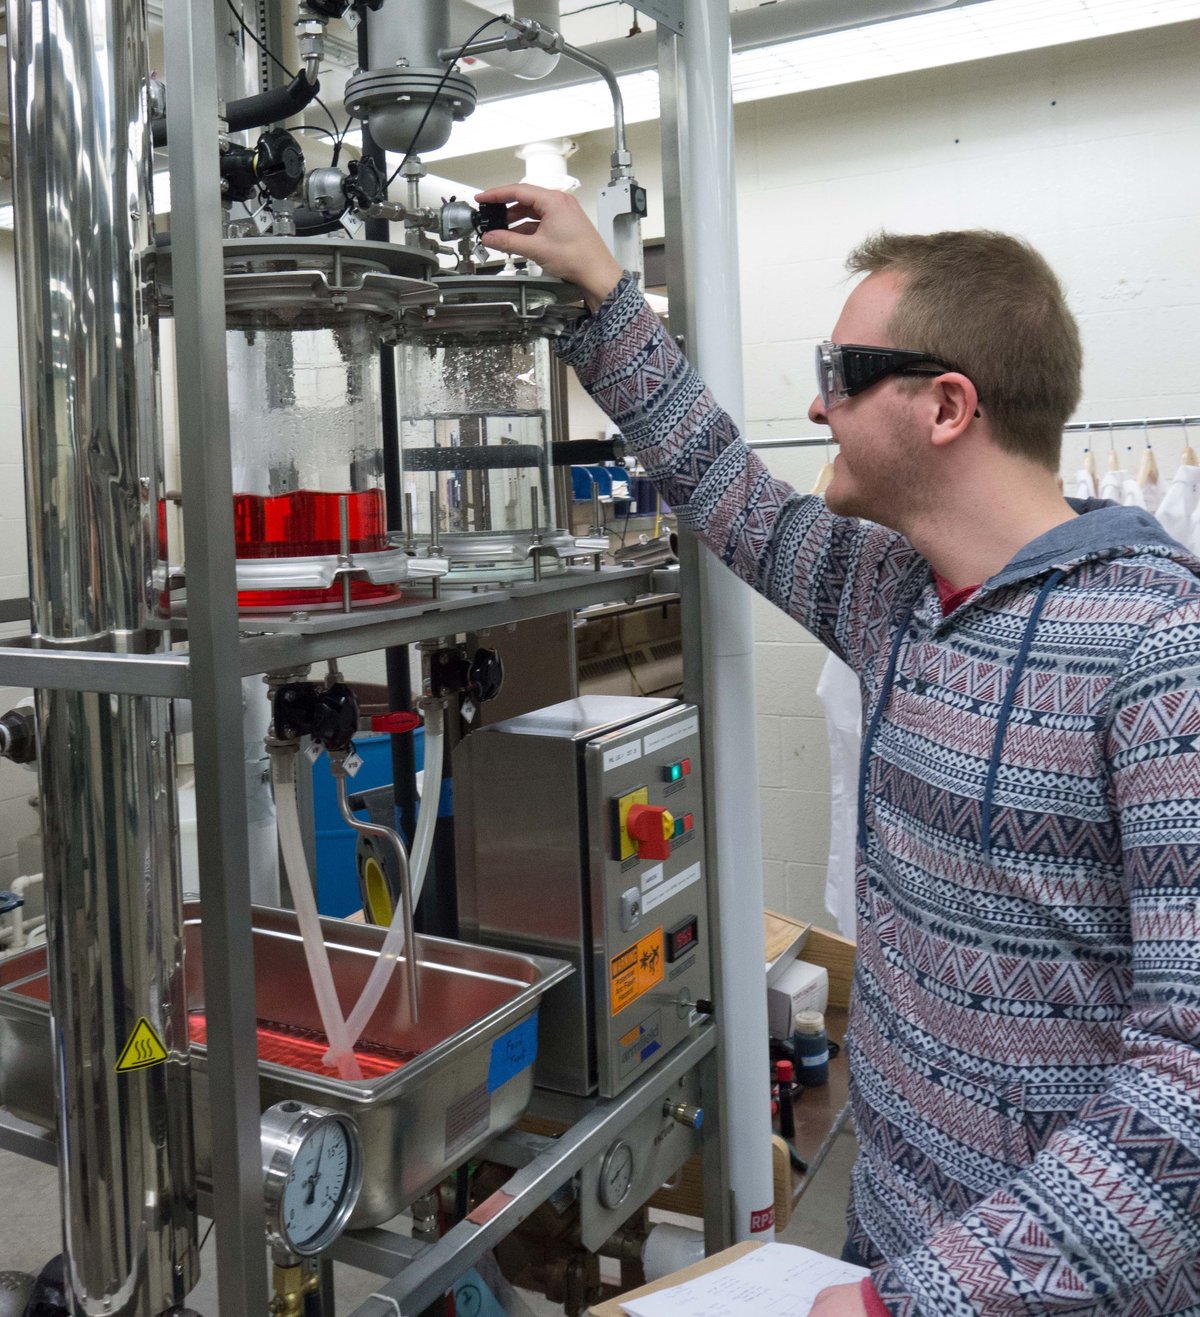 A student makes adjustments to an evaporator machine with clear red liquid in it.